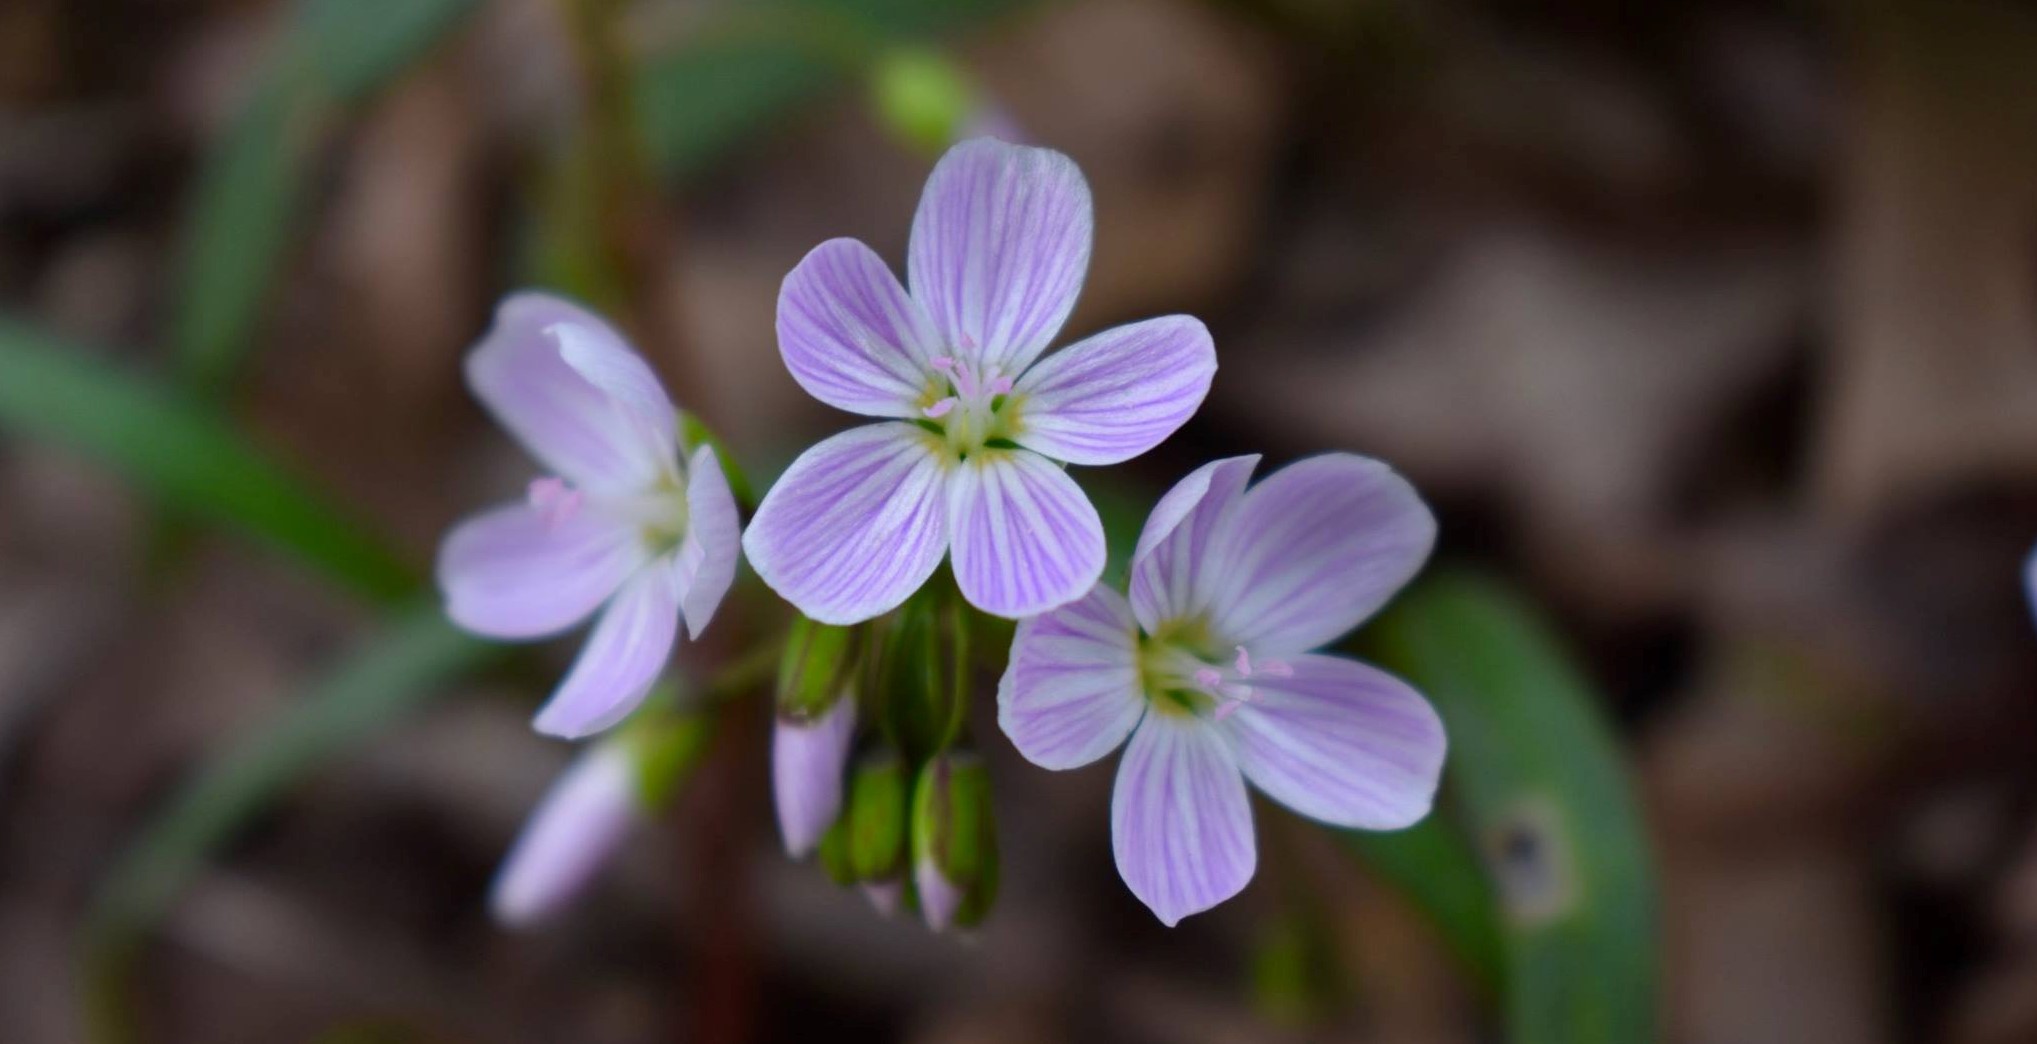 Spring-beauties-claytonia-virginica bursting out of the winter soil, signaling spring